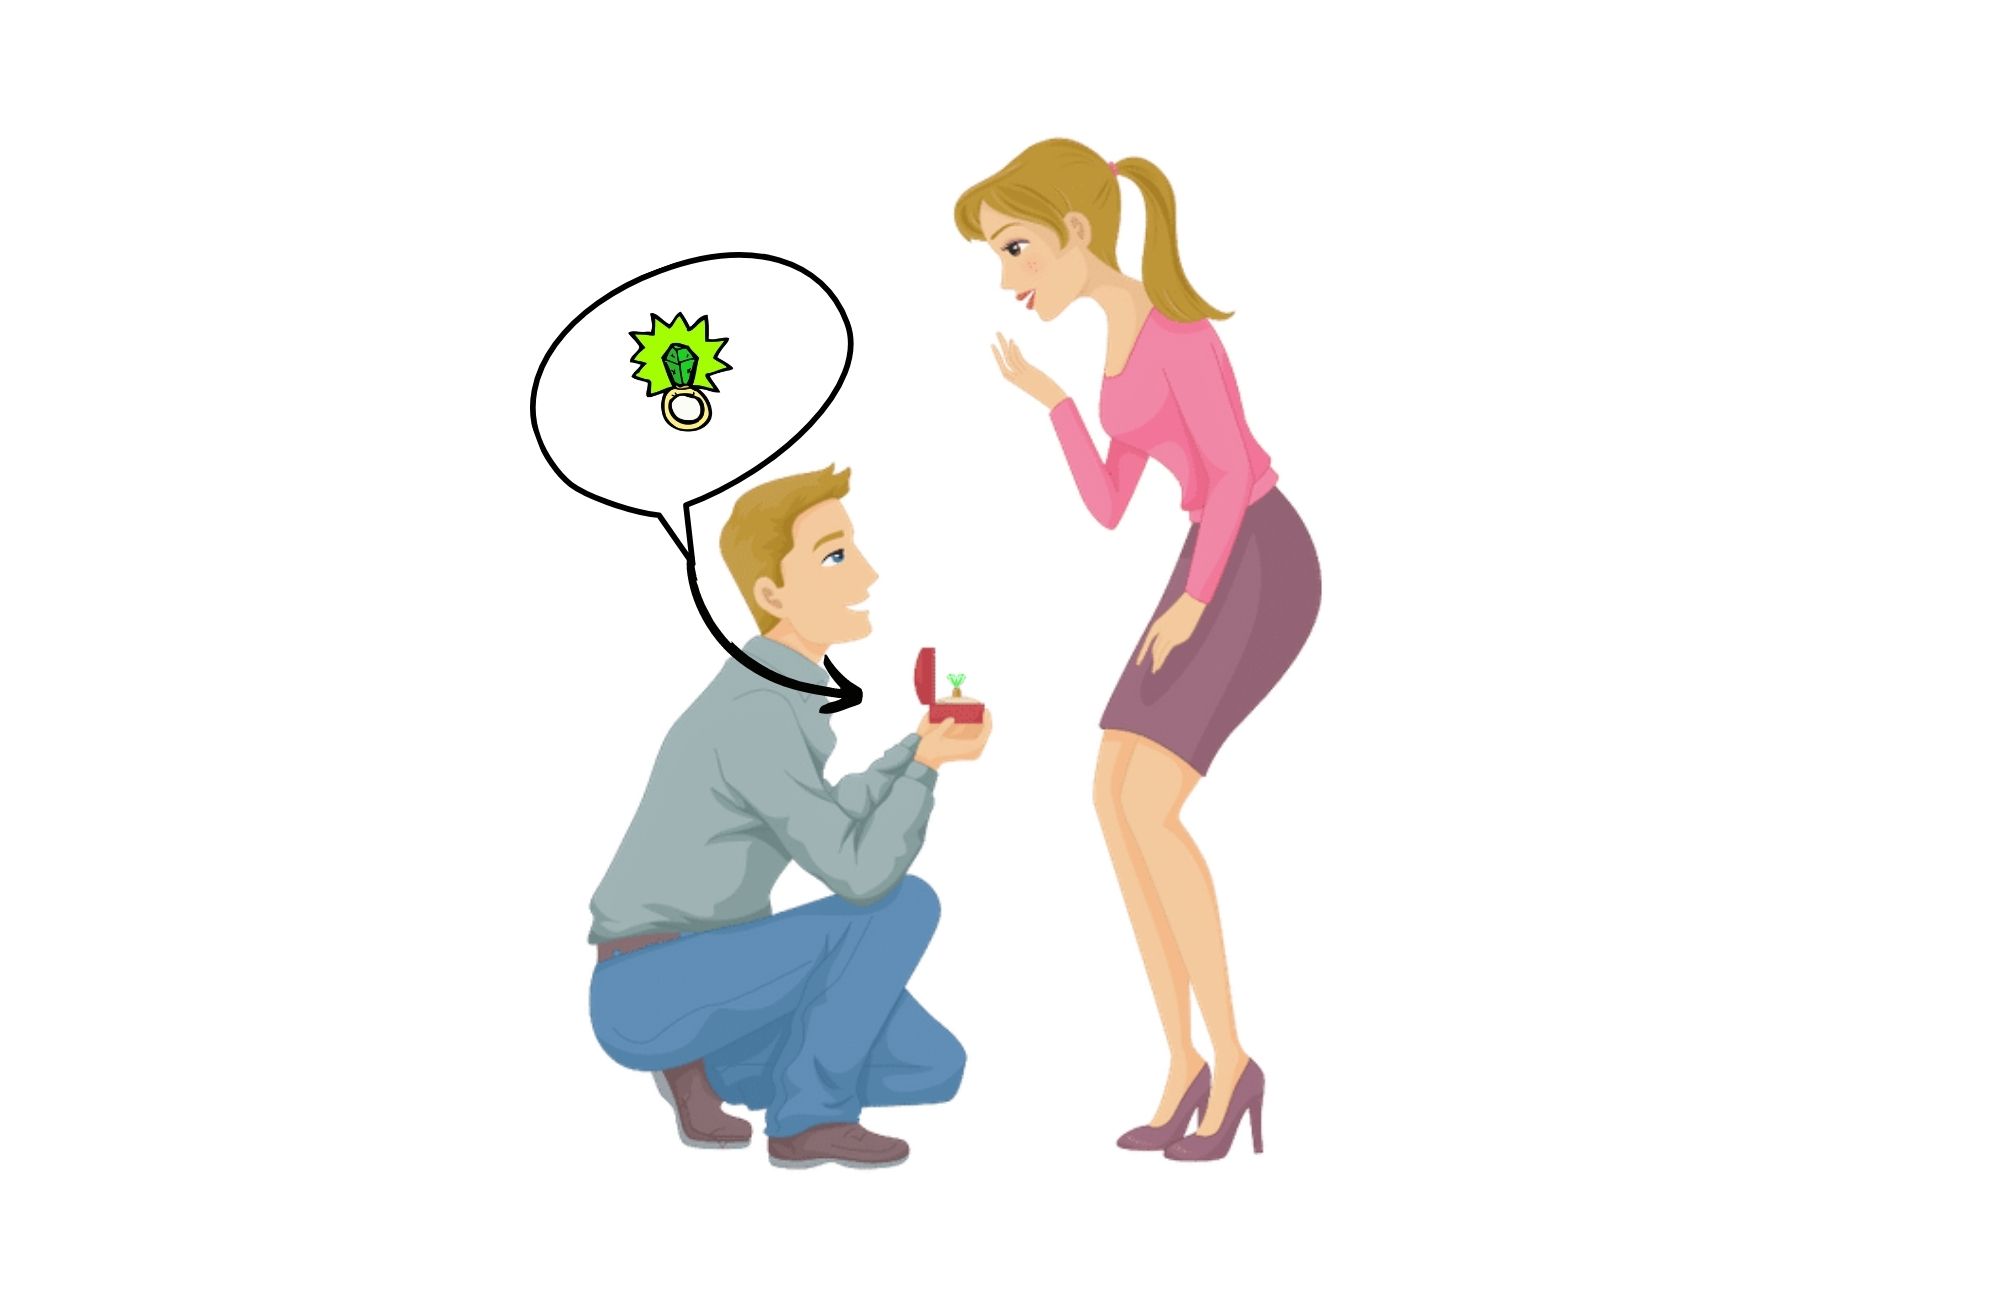 A man is proposing to his fiancee with a green crystal ring